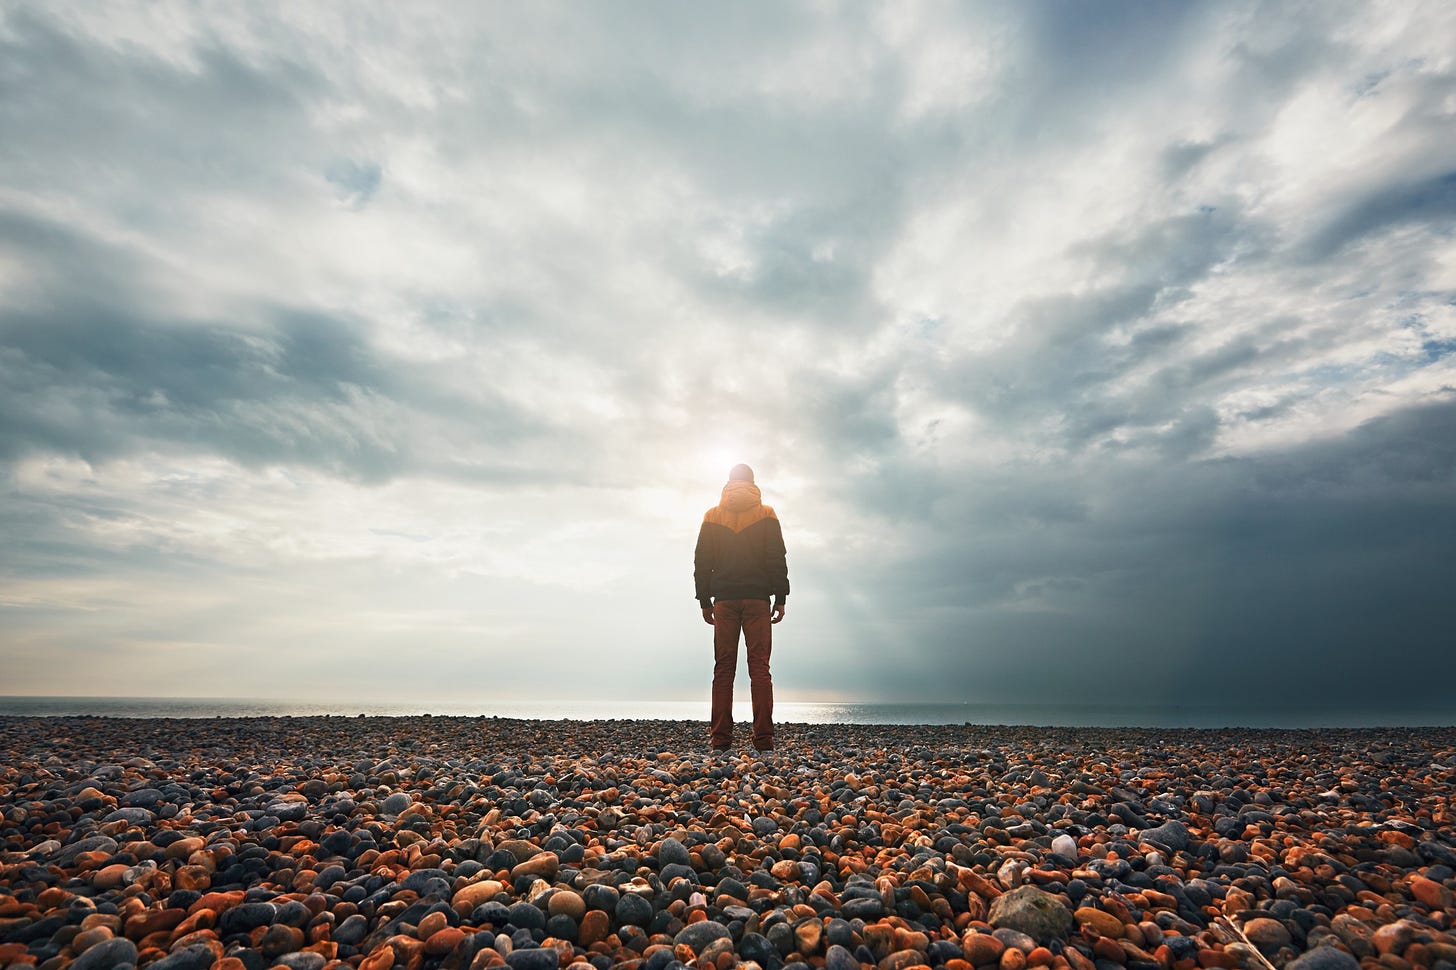 A person stands alone on a rocky beach and stares out toward the sea and endless sky.